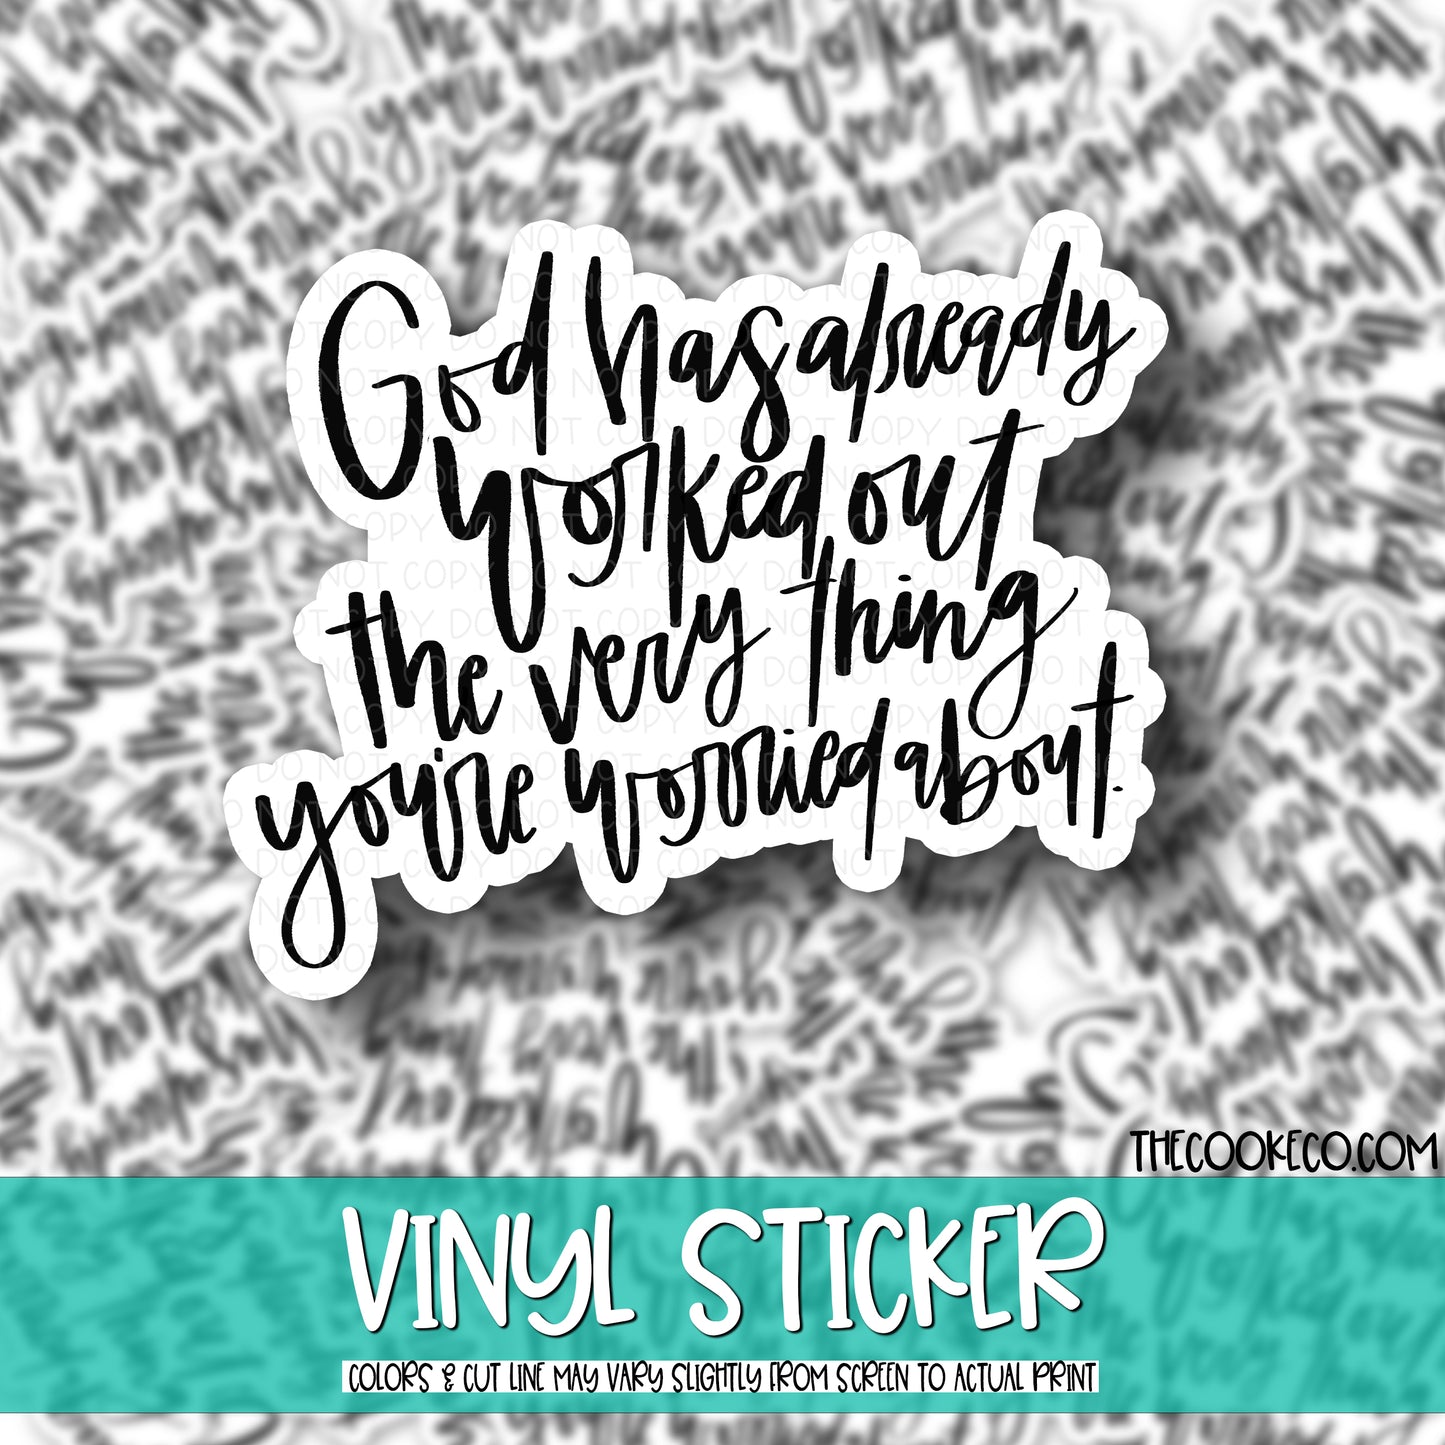 Vinyl Sticker | #V0518 - GOD HAS ALREADY WORKED OUT THE THING YOURE WORRIED ABOUT